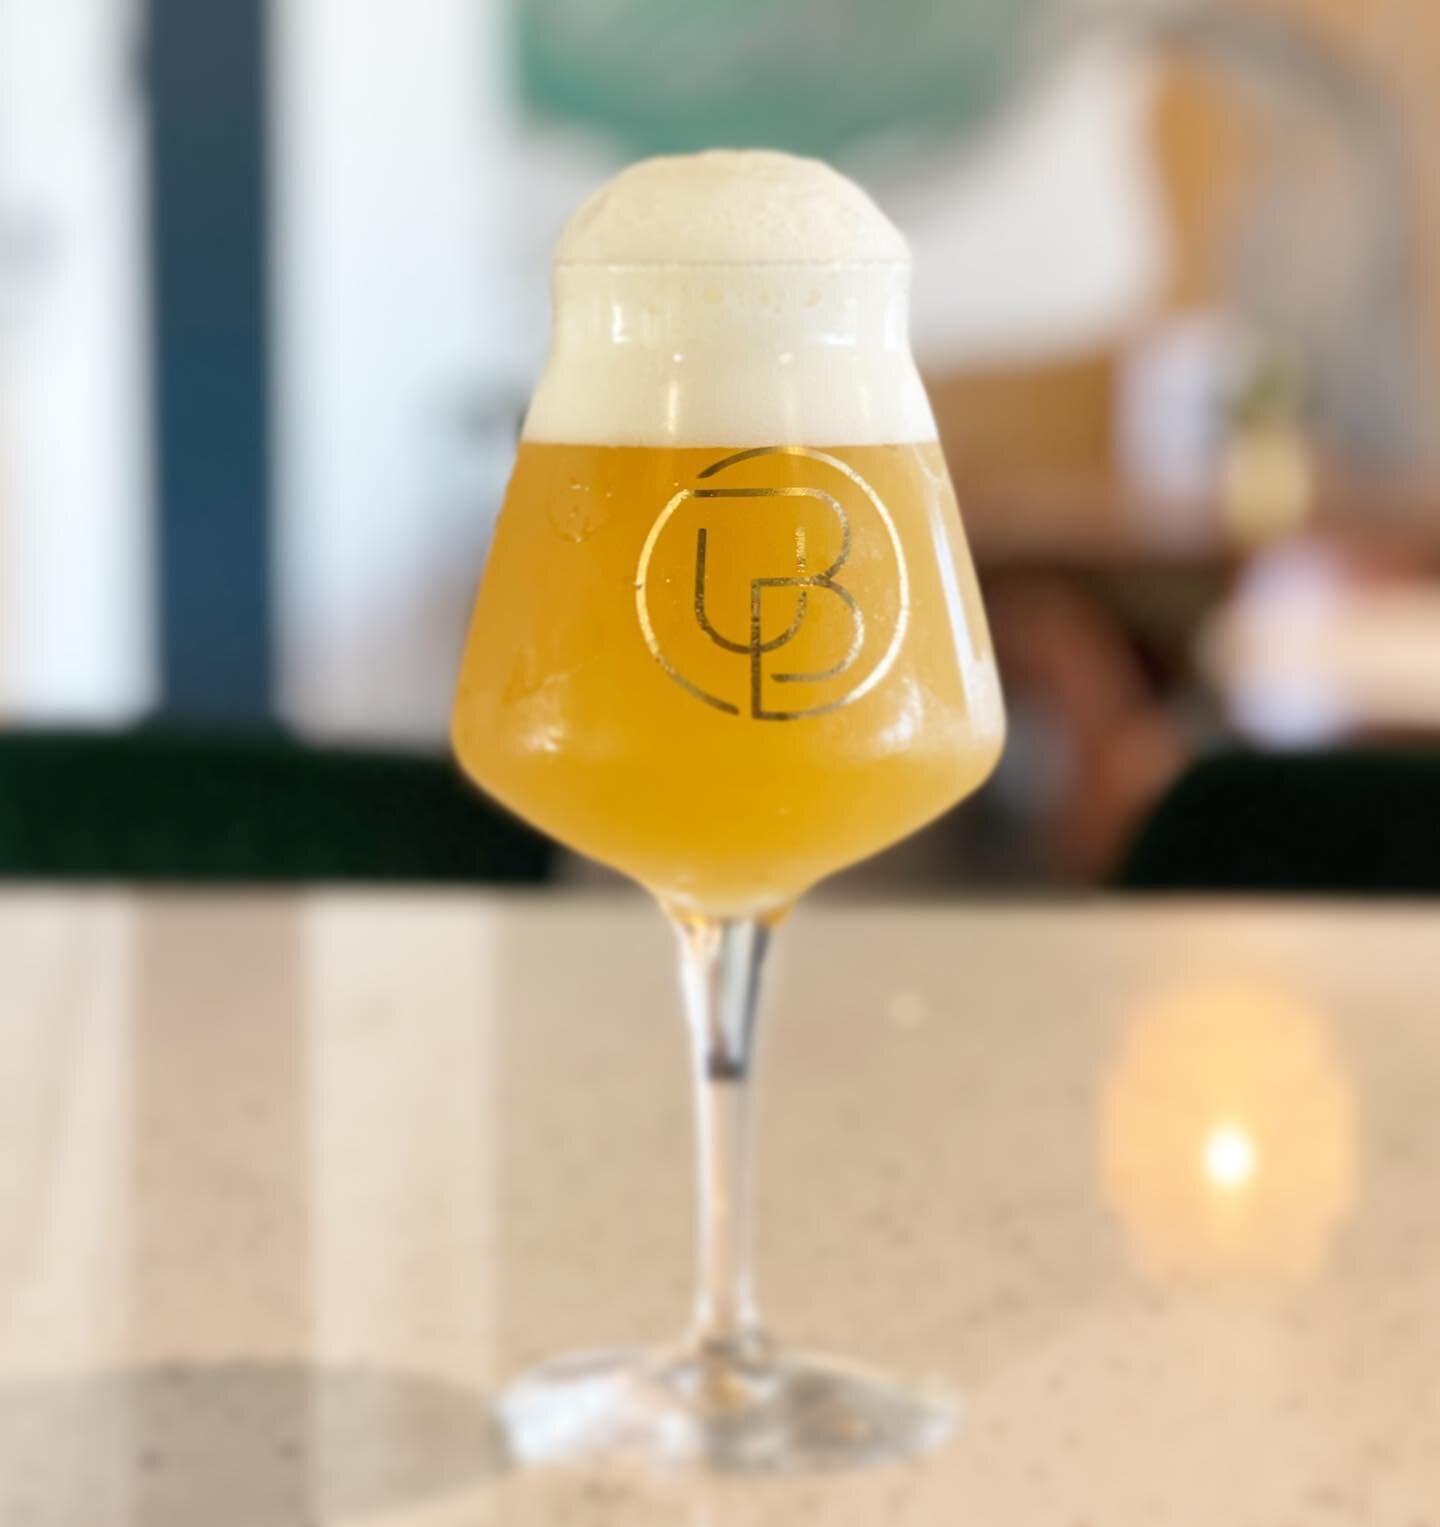 Power Through

Eight.One %

Citra, Vista and Hallertau 

Citra being Citra, citrus and floral hints from Vista, rounded out by Hallertau's classic earthy undertones. 

Bursting with aromas of grapefruit, lime, and tropical paradise, each sip envelops